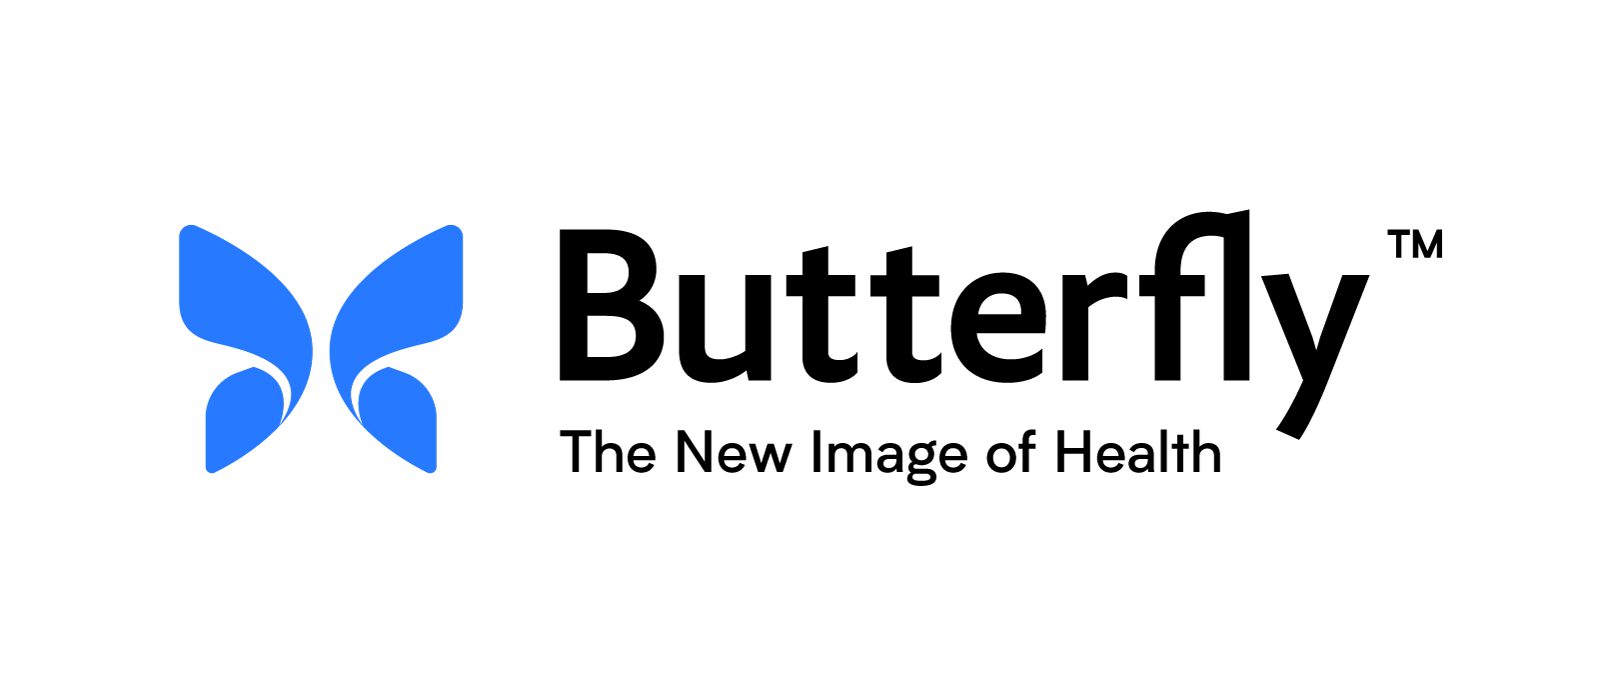 Butterfly, Mendaera Partner to Transform Interventional Care with AI-Powered Robots